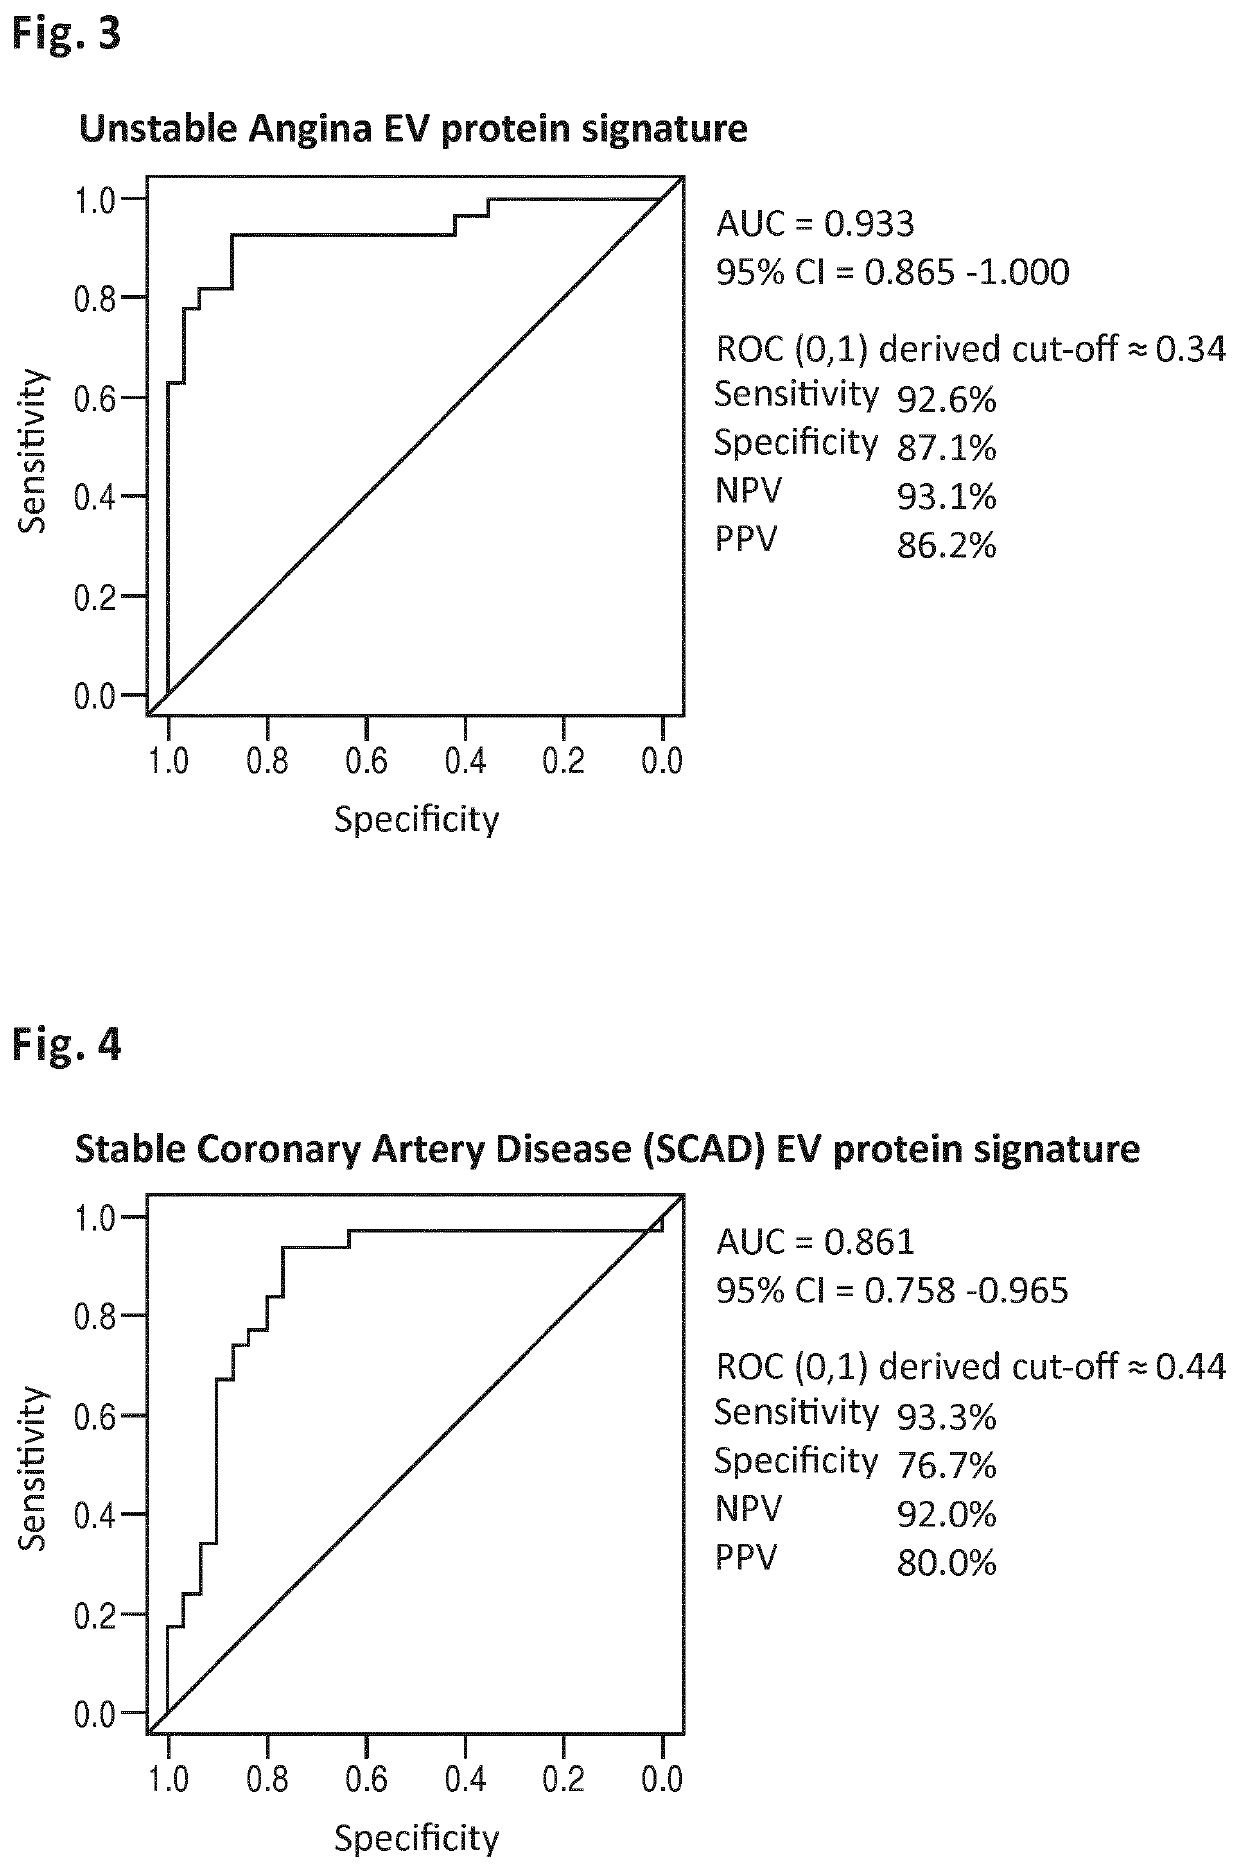 Extracellular vesicle markers for stable angina and unstable angina